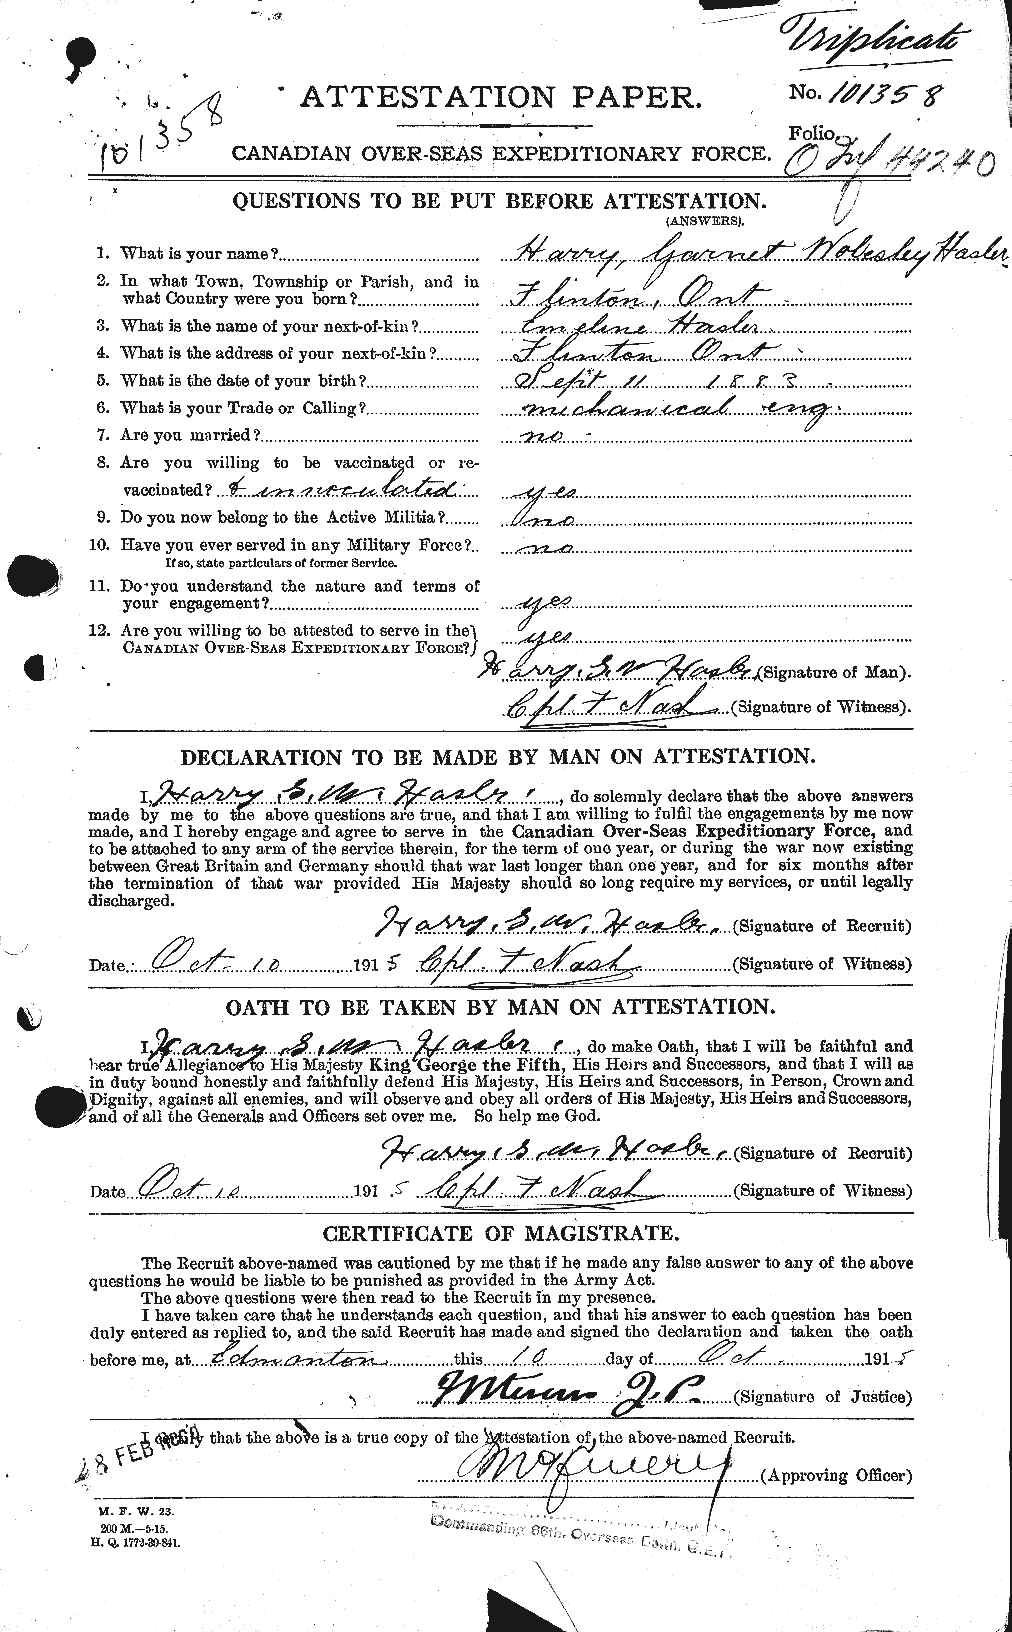 Personnel Records of the First World War - CEF 386897a